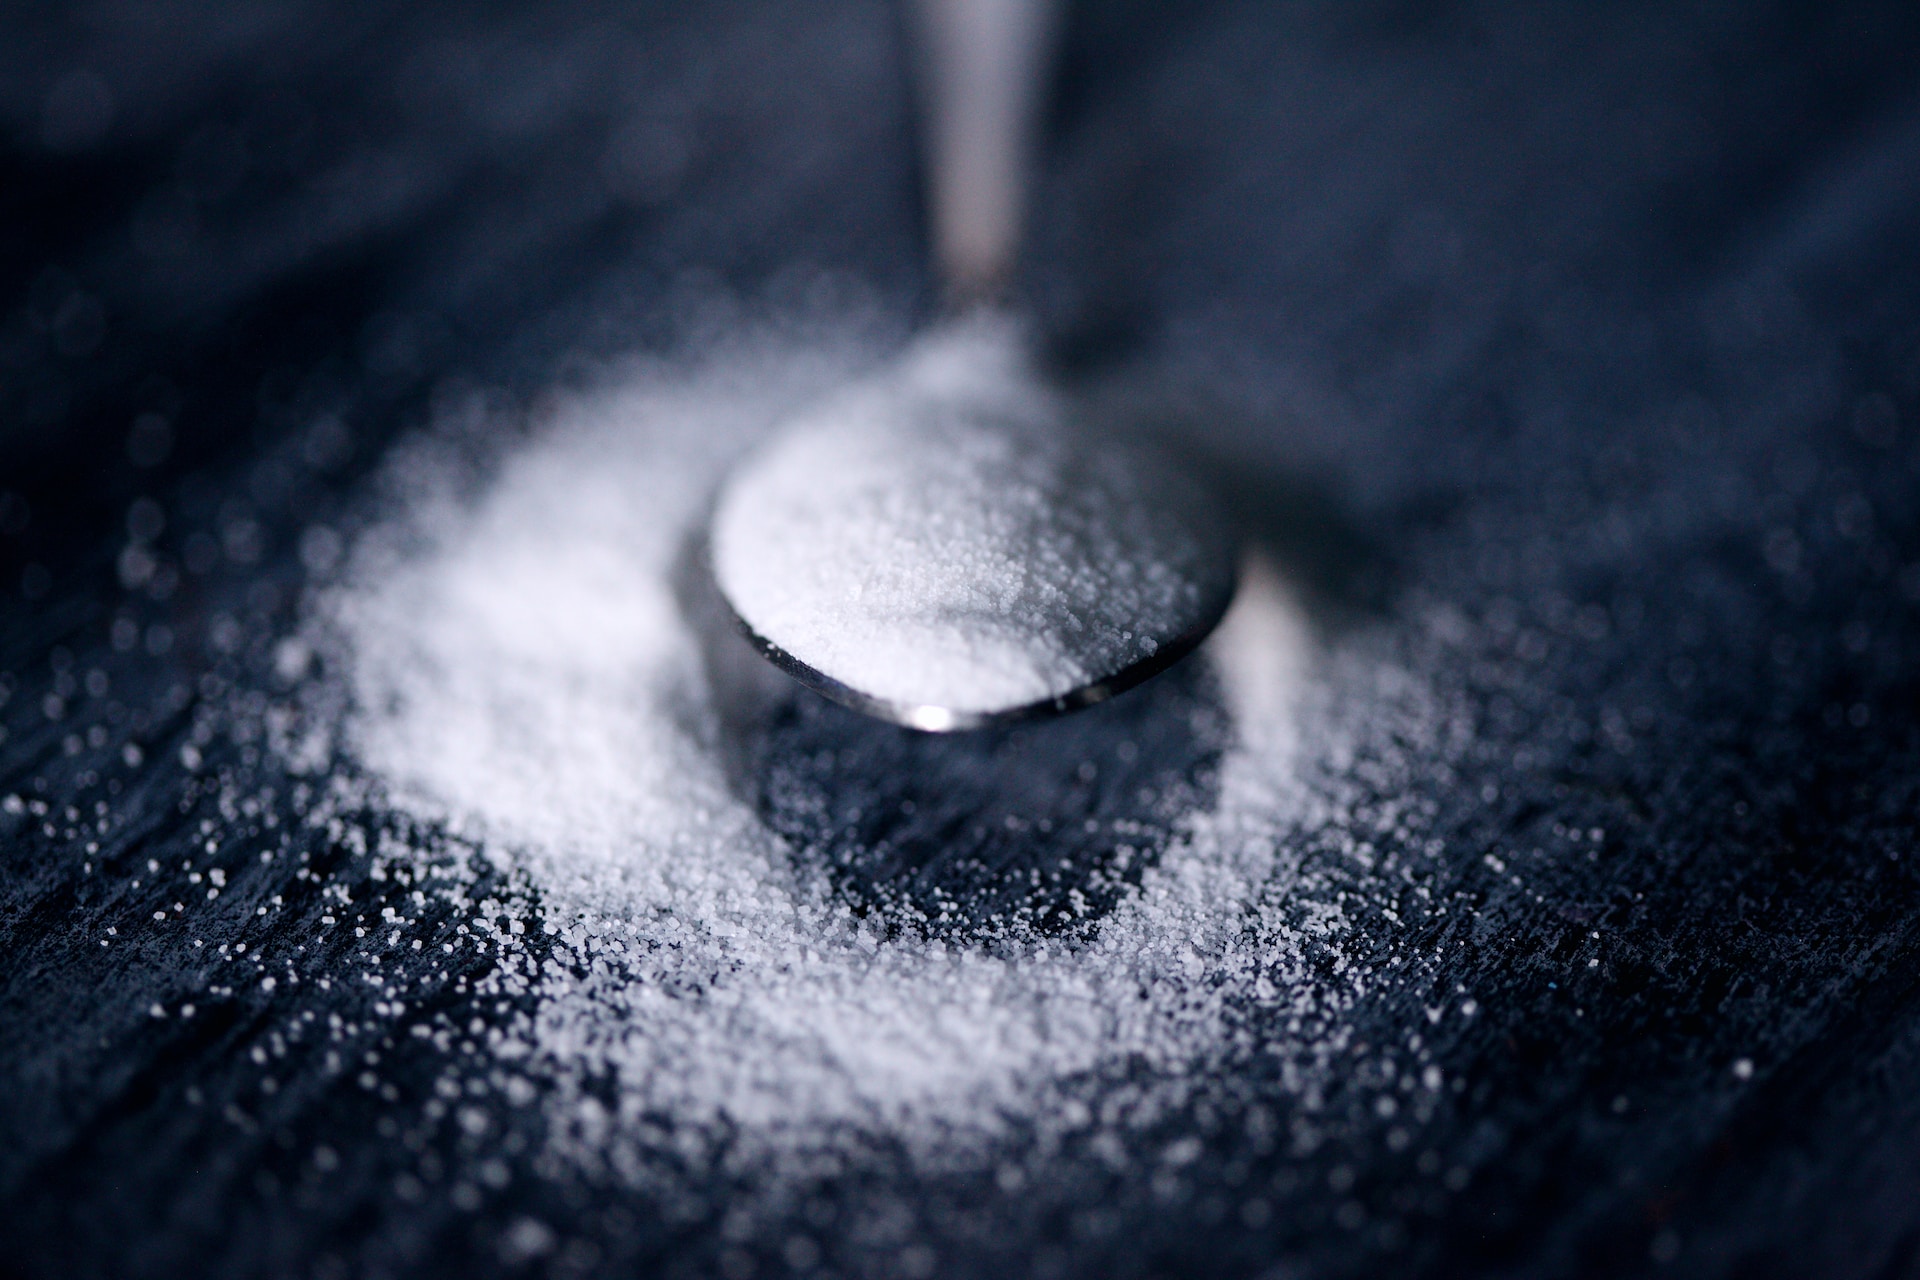 spotcovery-a-spoon-full-of-sugar-spilt-on-the-countertop-american-diabetes-month-why-black-americans-should-reduce-sugar-intake